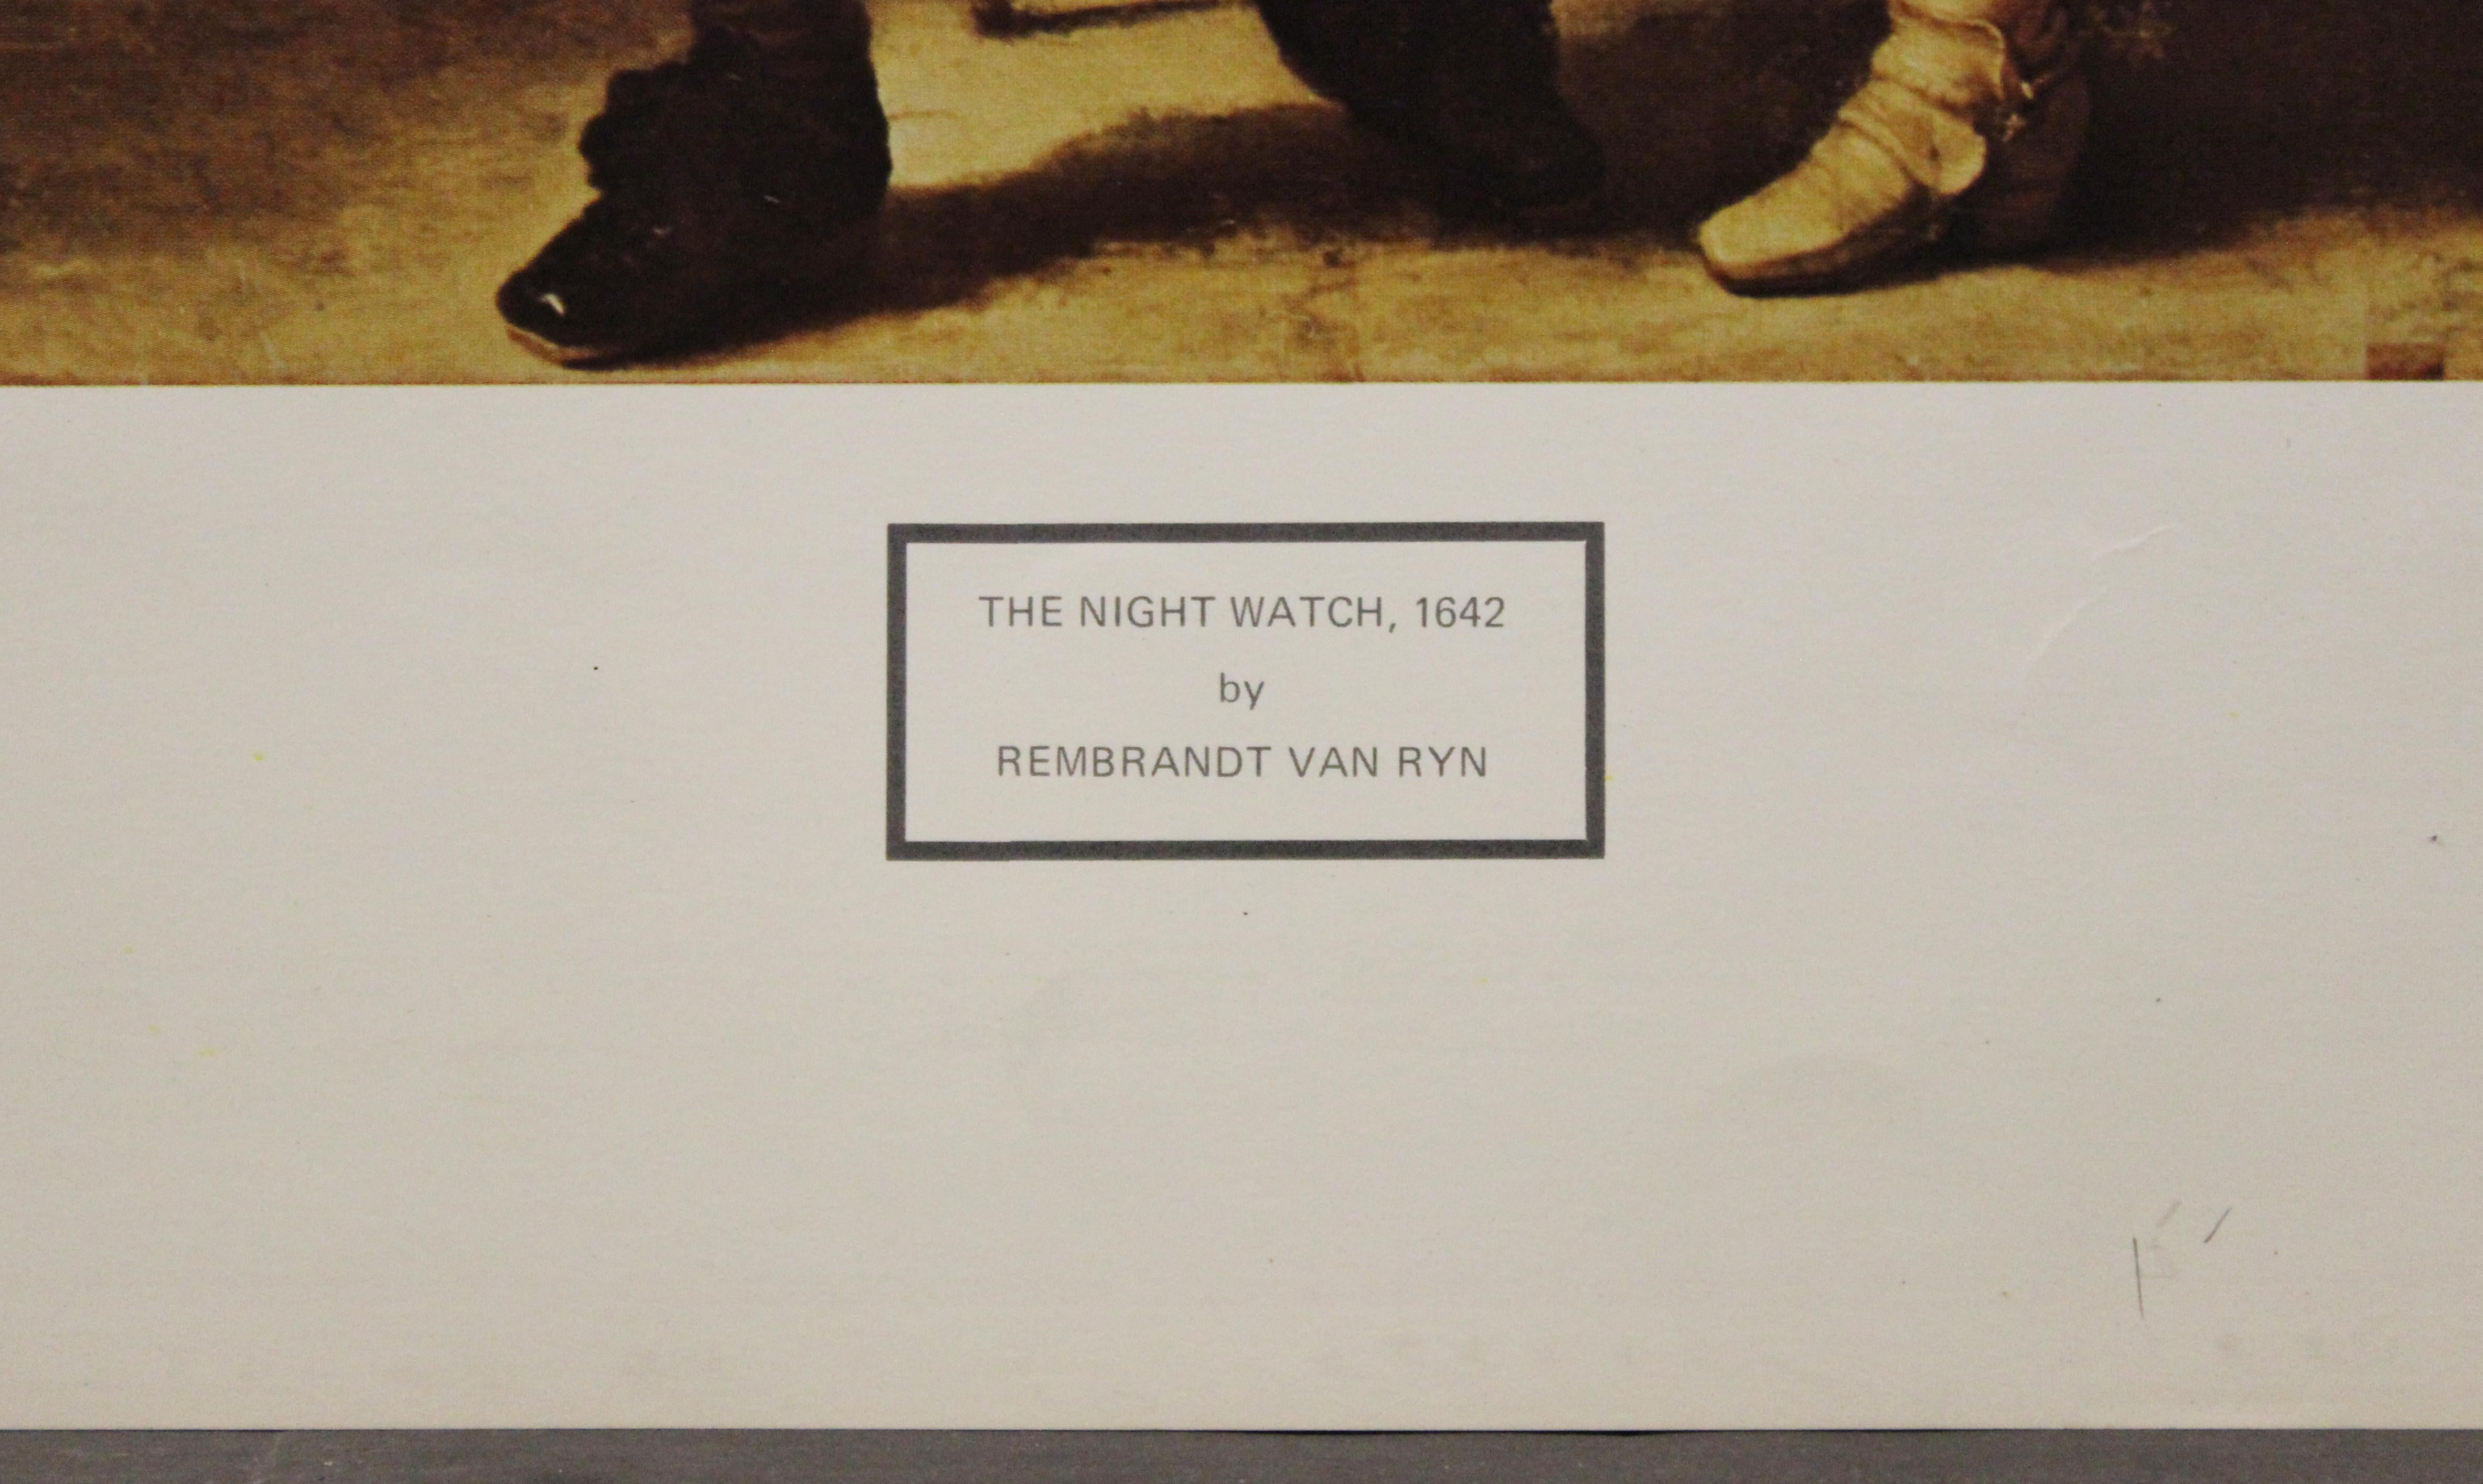 The Night Watch-Poster. Haddad's Fine Arts Inc.  - Print by (After) Rembrandt van Rijn 